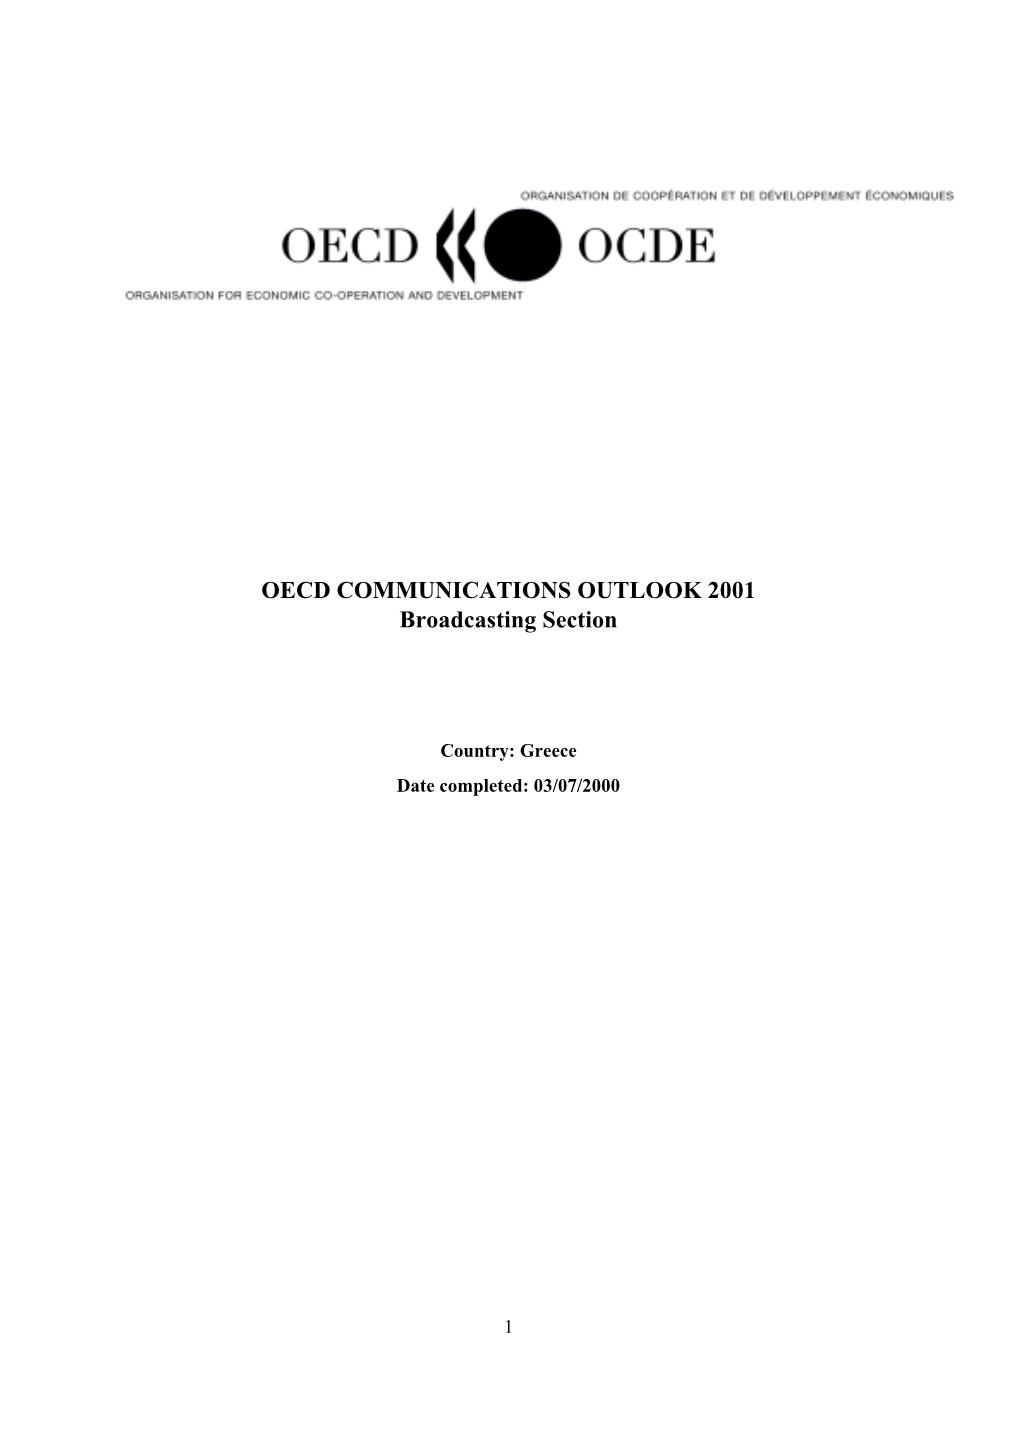 OECD COMMUNICATIONS OUTLOOK 2001 Broadcasting Section